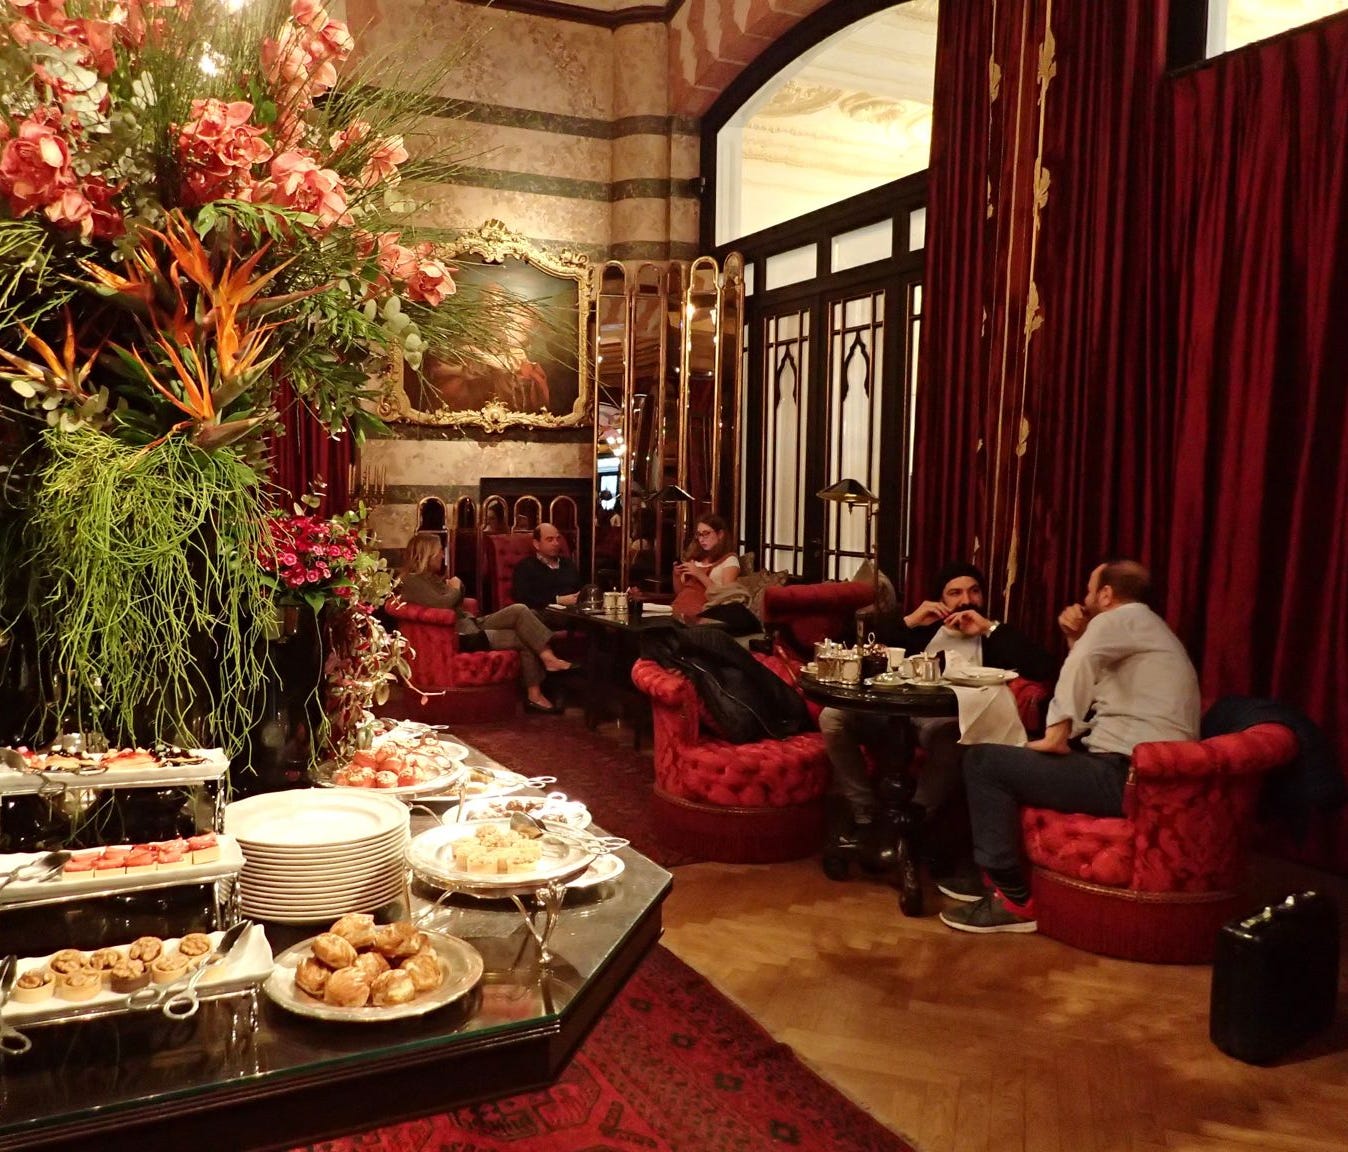 At the Pera Palace Hotel Jumeirah in Istanbul, English tea was served daily with chocolates, fruit and flowers in the extreme Orientalist-styled Kubbeli Salon.  